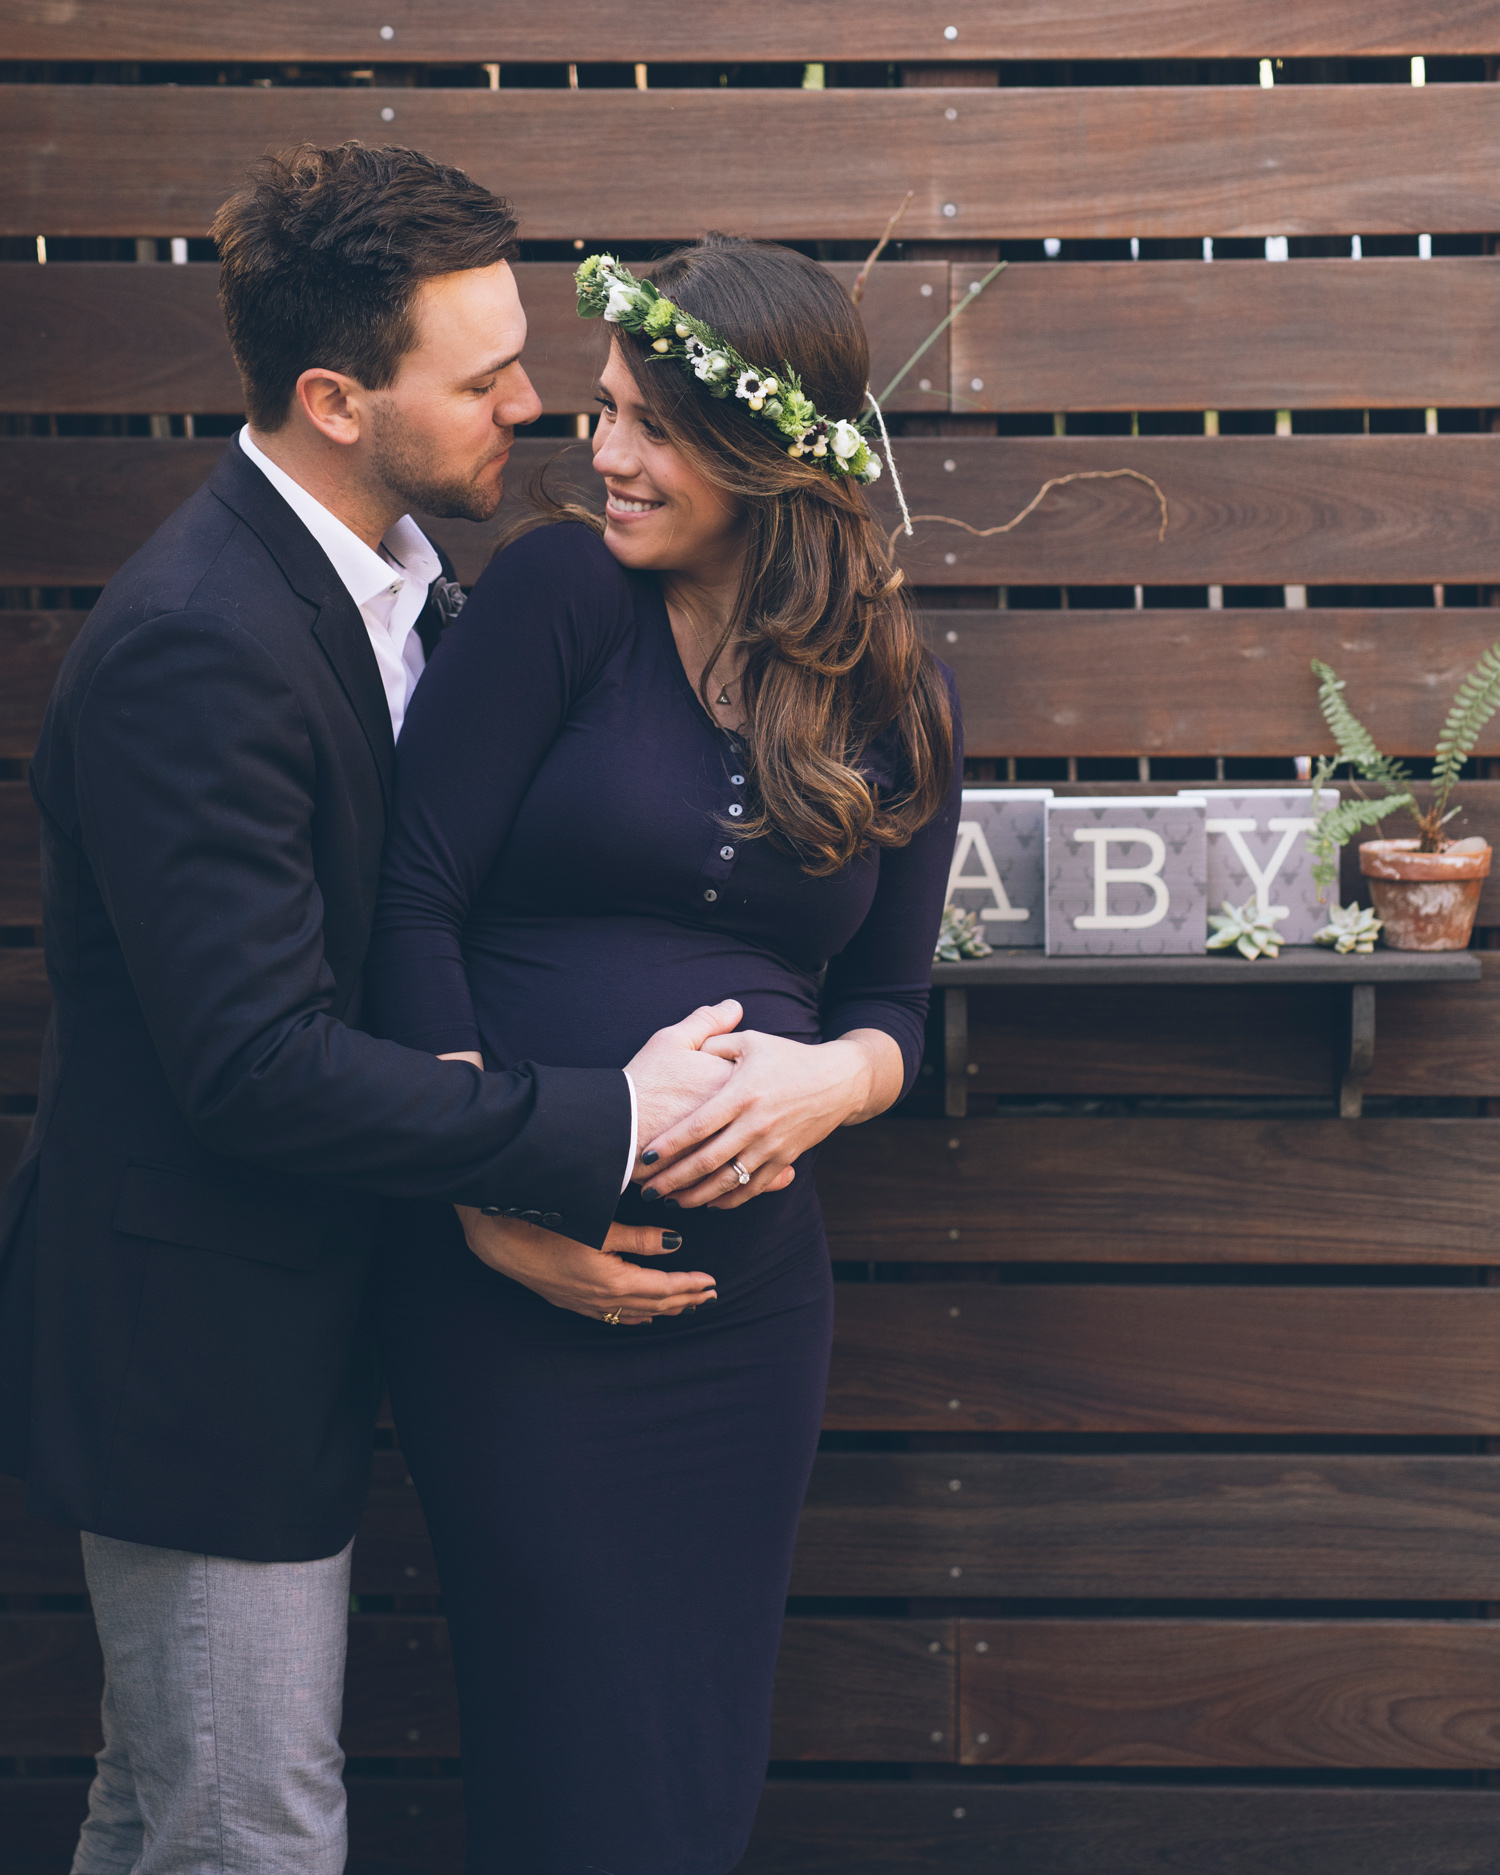 husband-and-wife-looking-at-each-other-lovingly-during-maternity-session-in-oakland.jpg